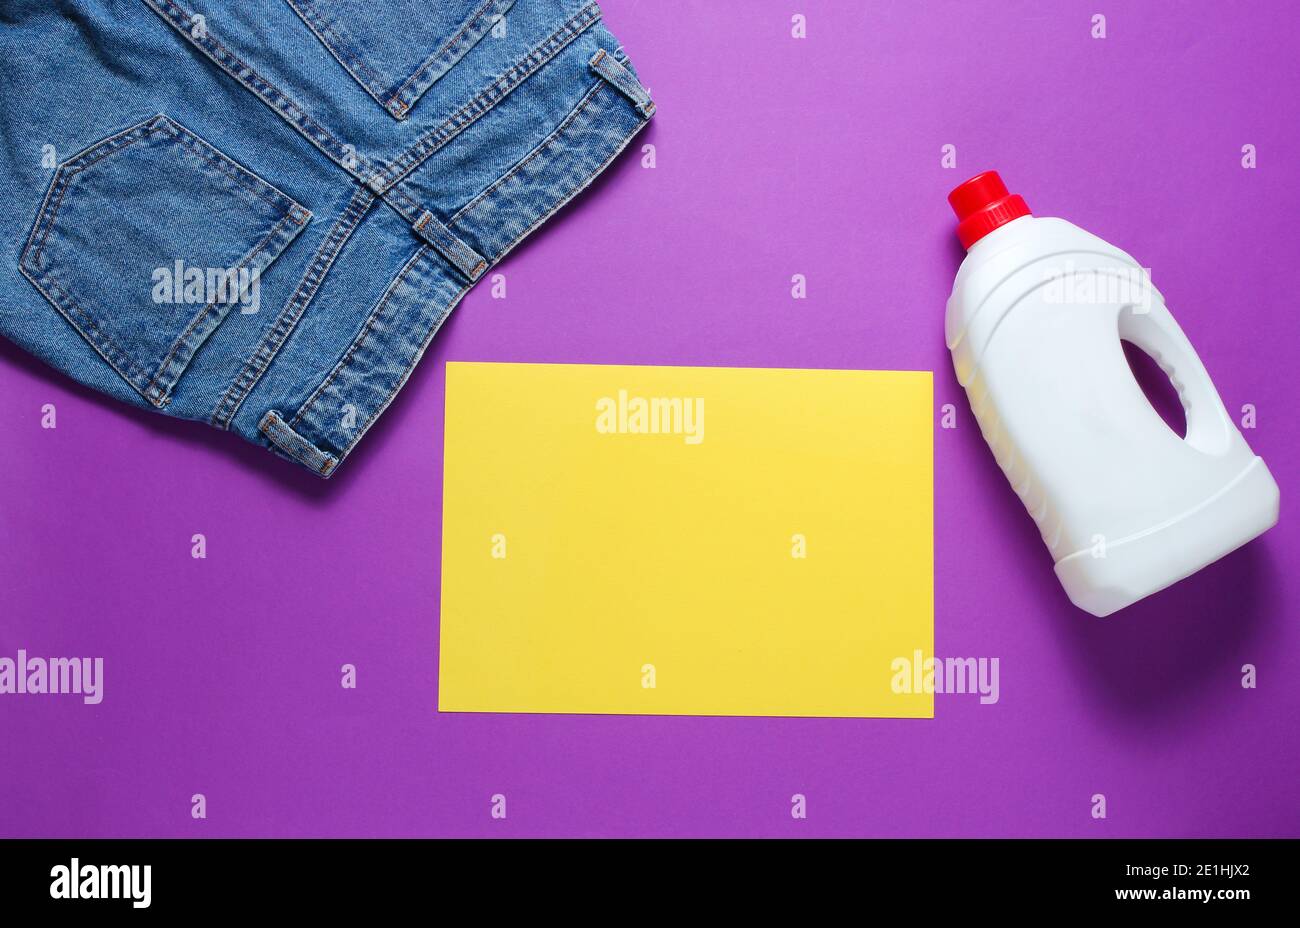 Minimalistic concept of washing. Paper for copy space, Jeans, bottle of washing gel on purple background. Top view Stock Photo